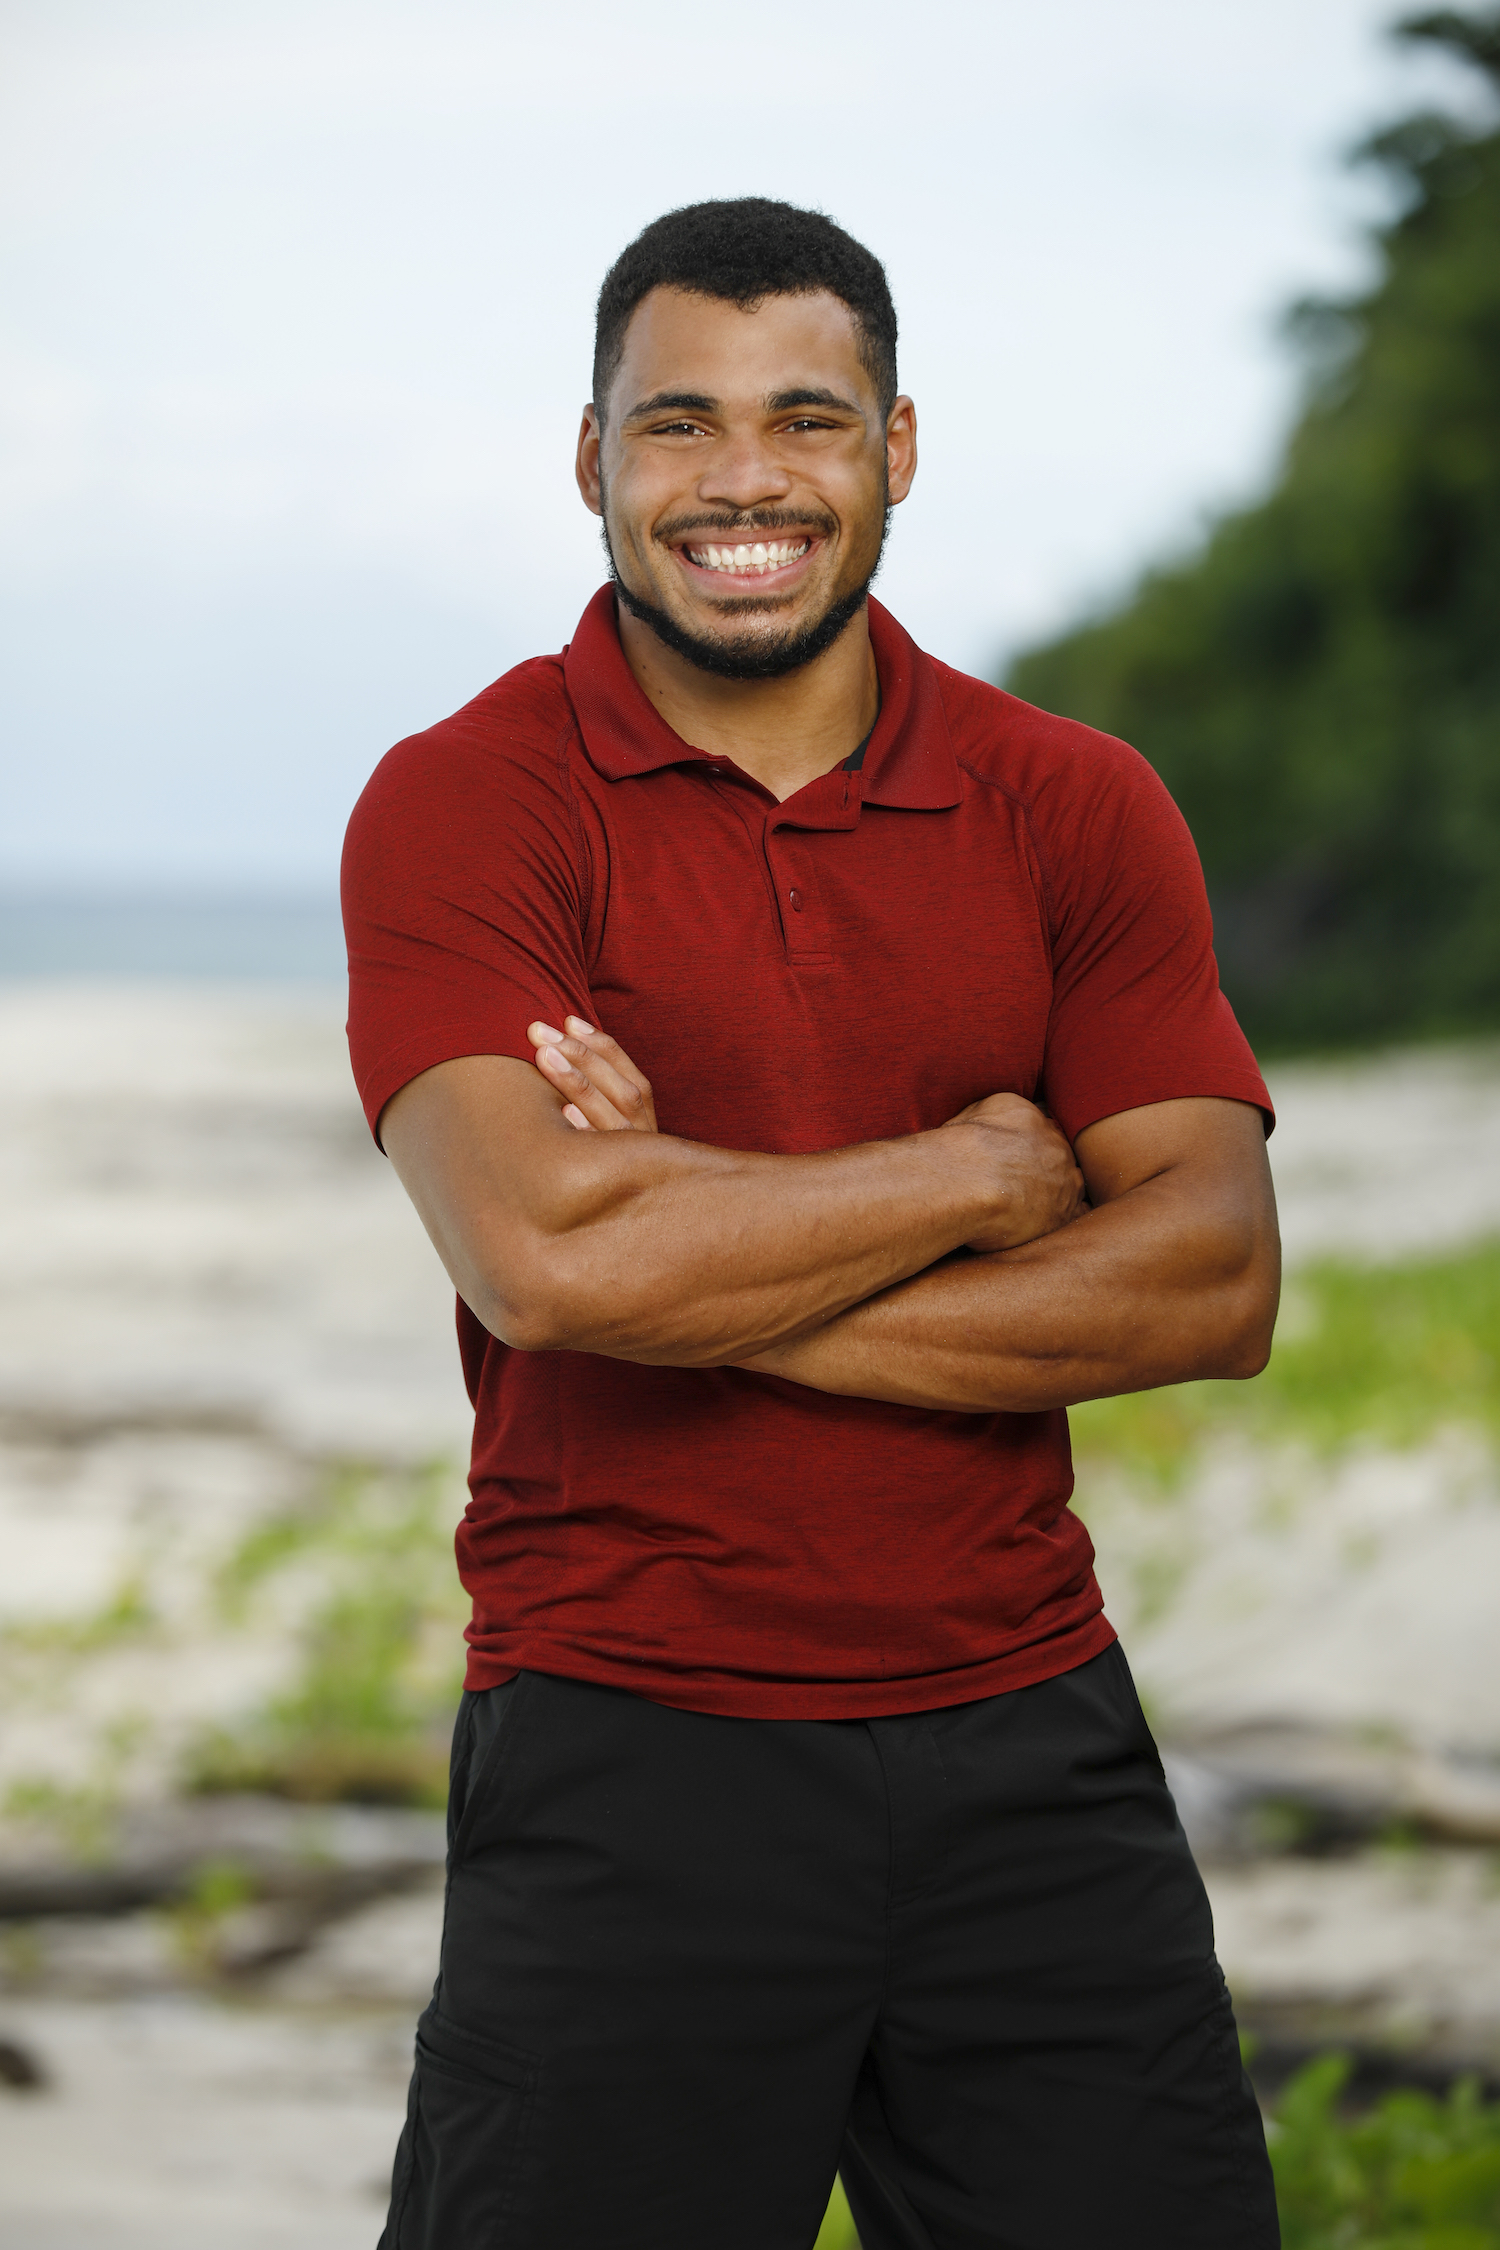 Survivor 43': Meet Philly-area contestants competing this season